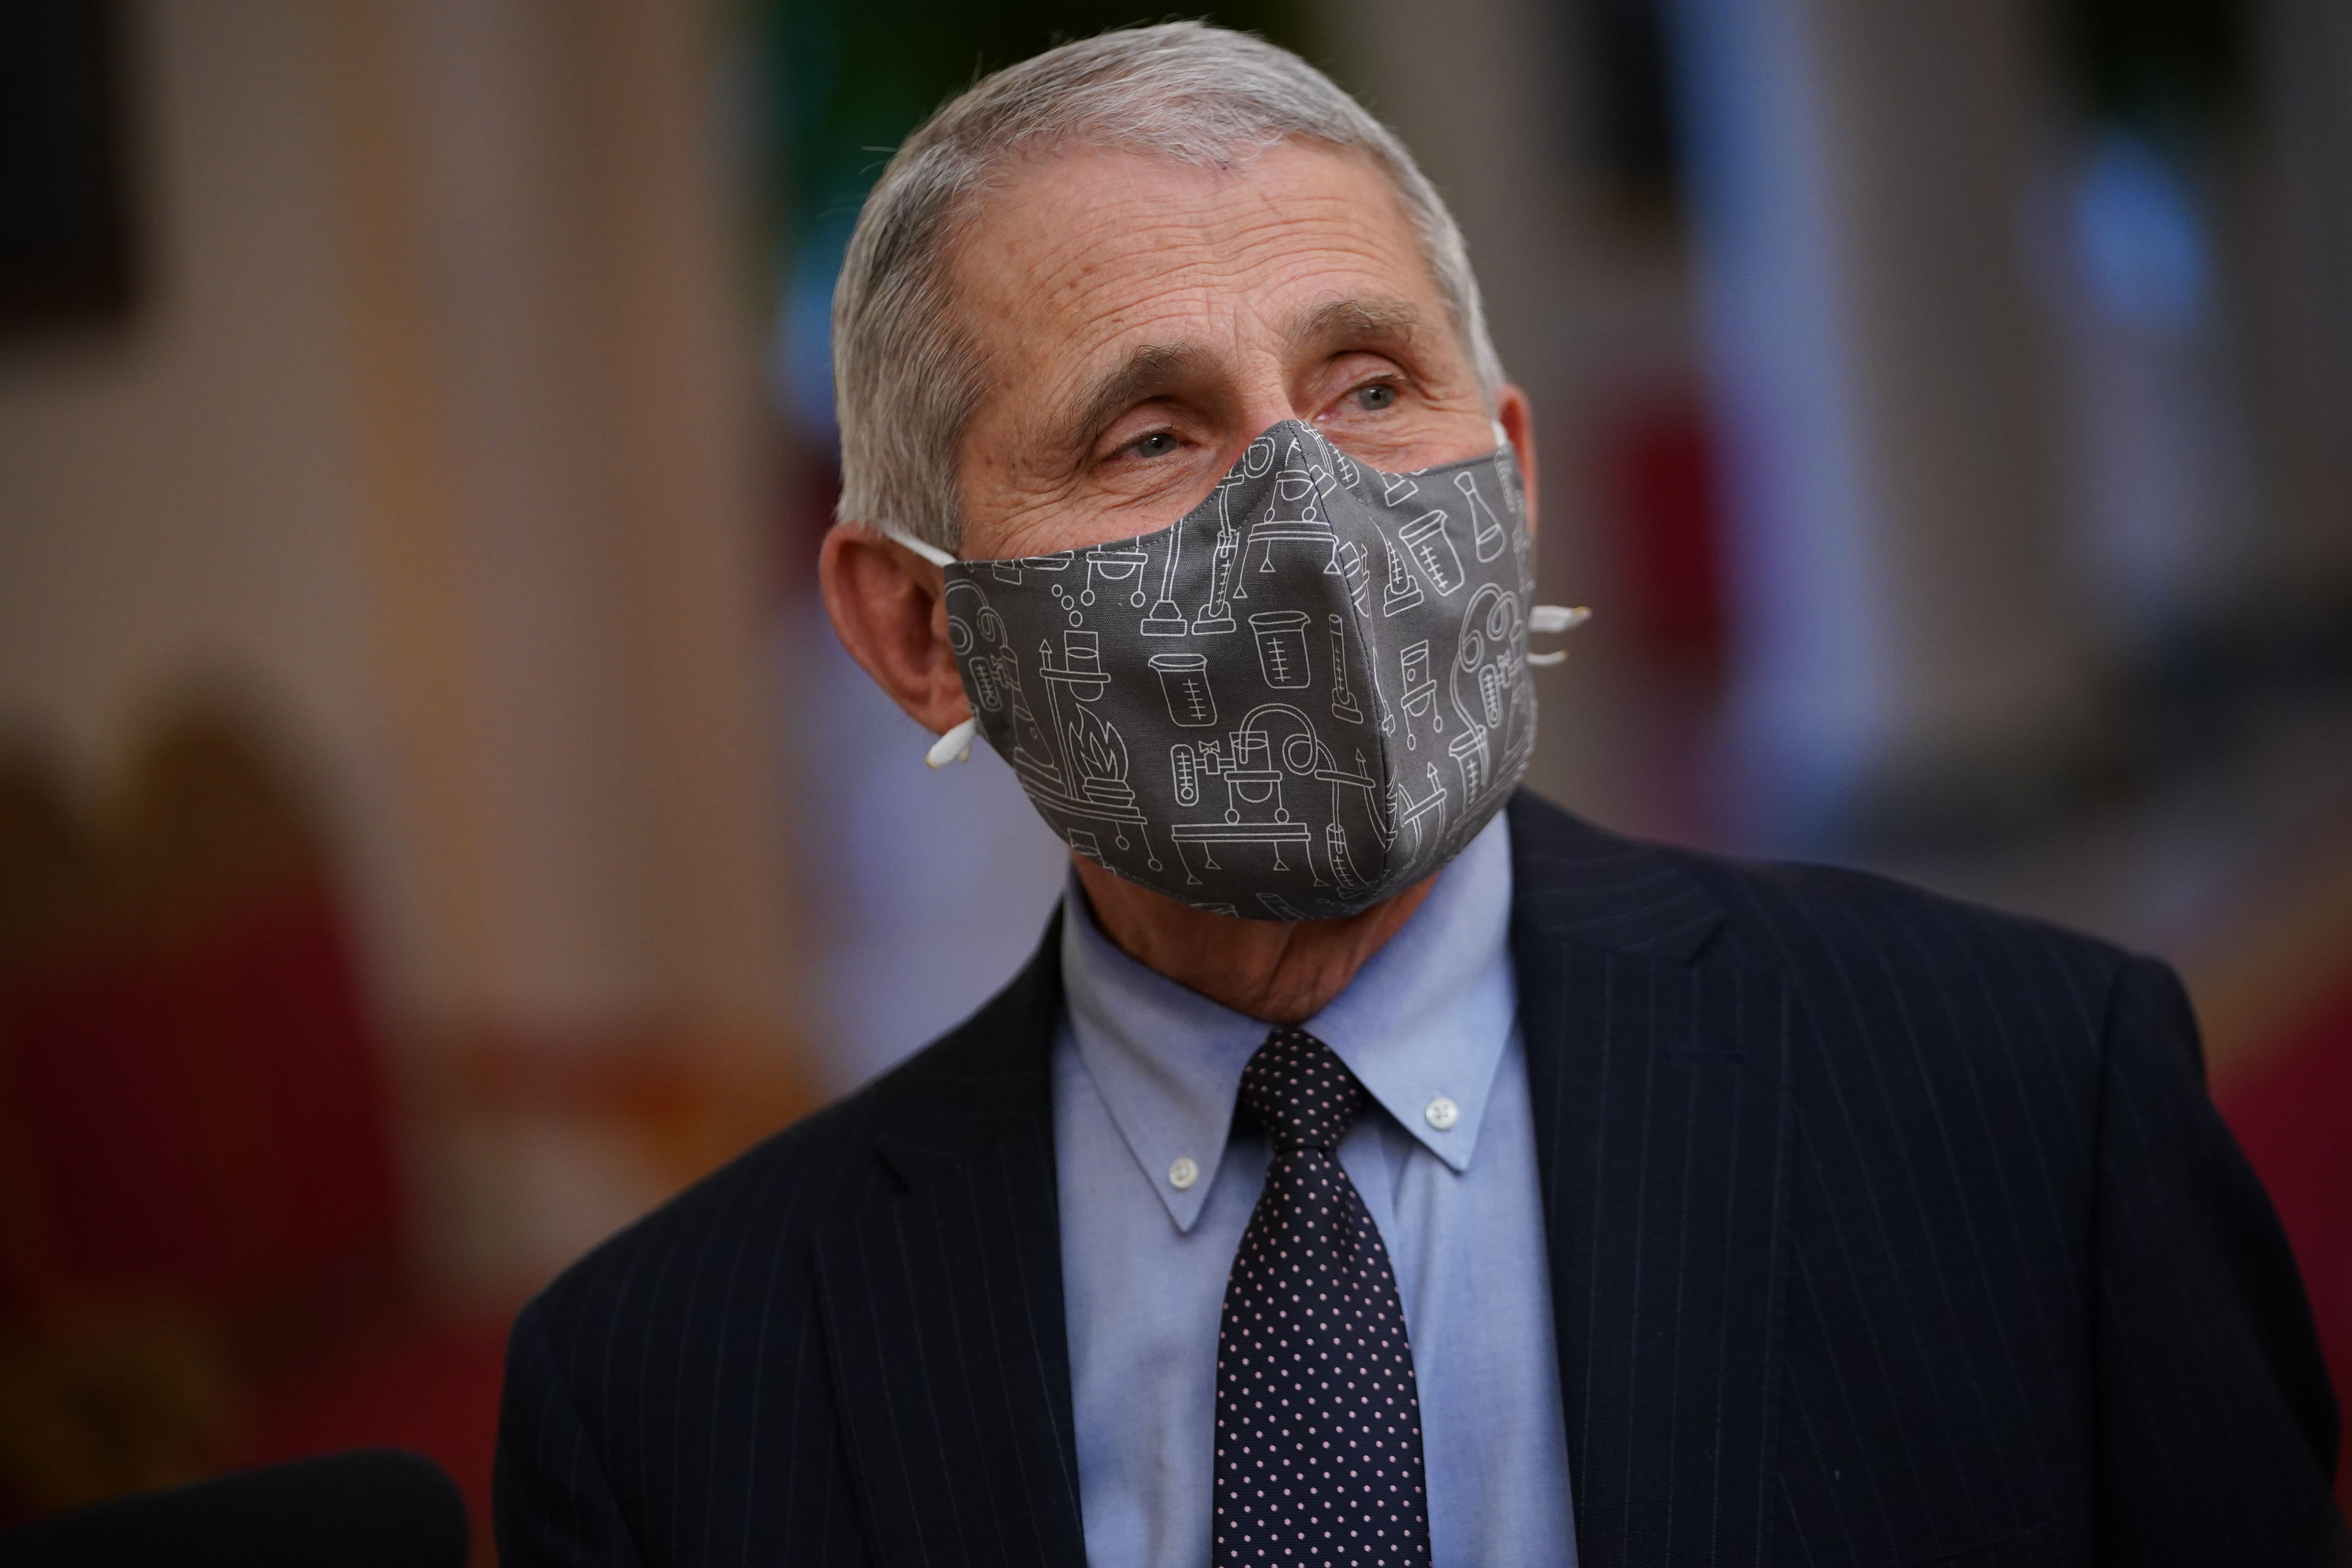 Dr. Fauci: Double-masking makes 'common sense' and is likely more effective